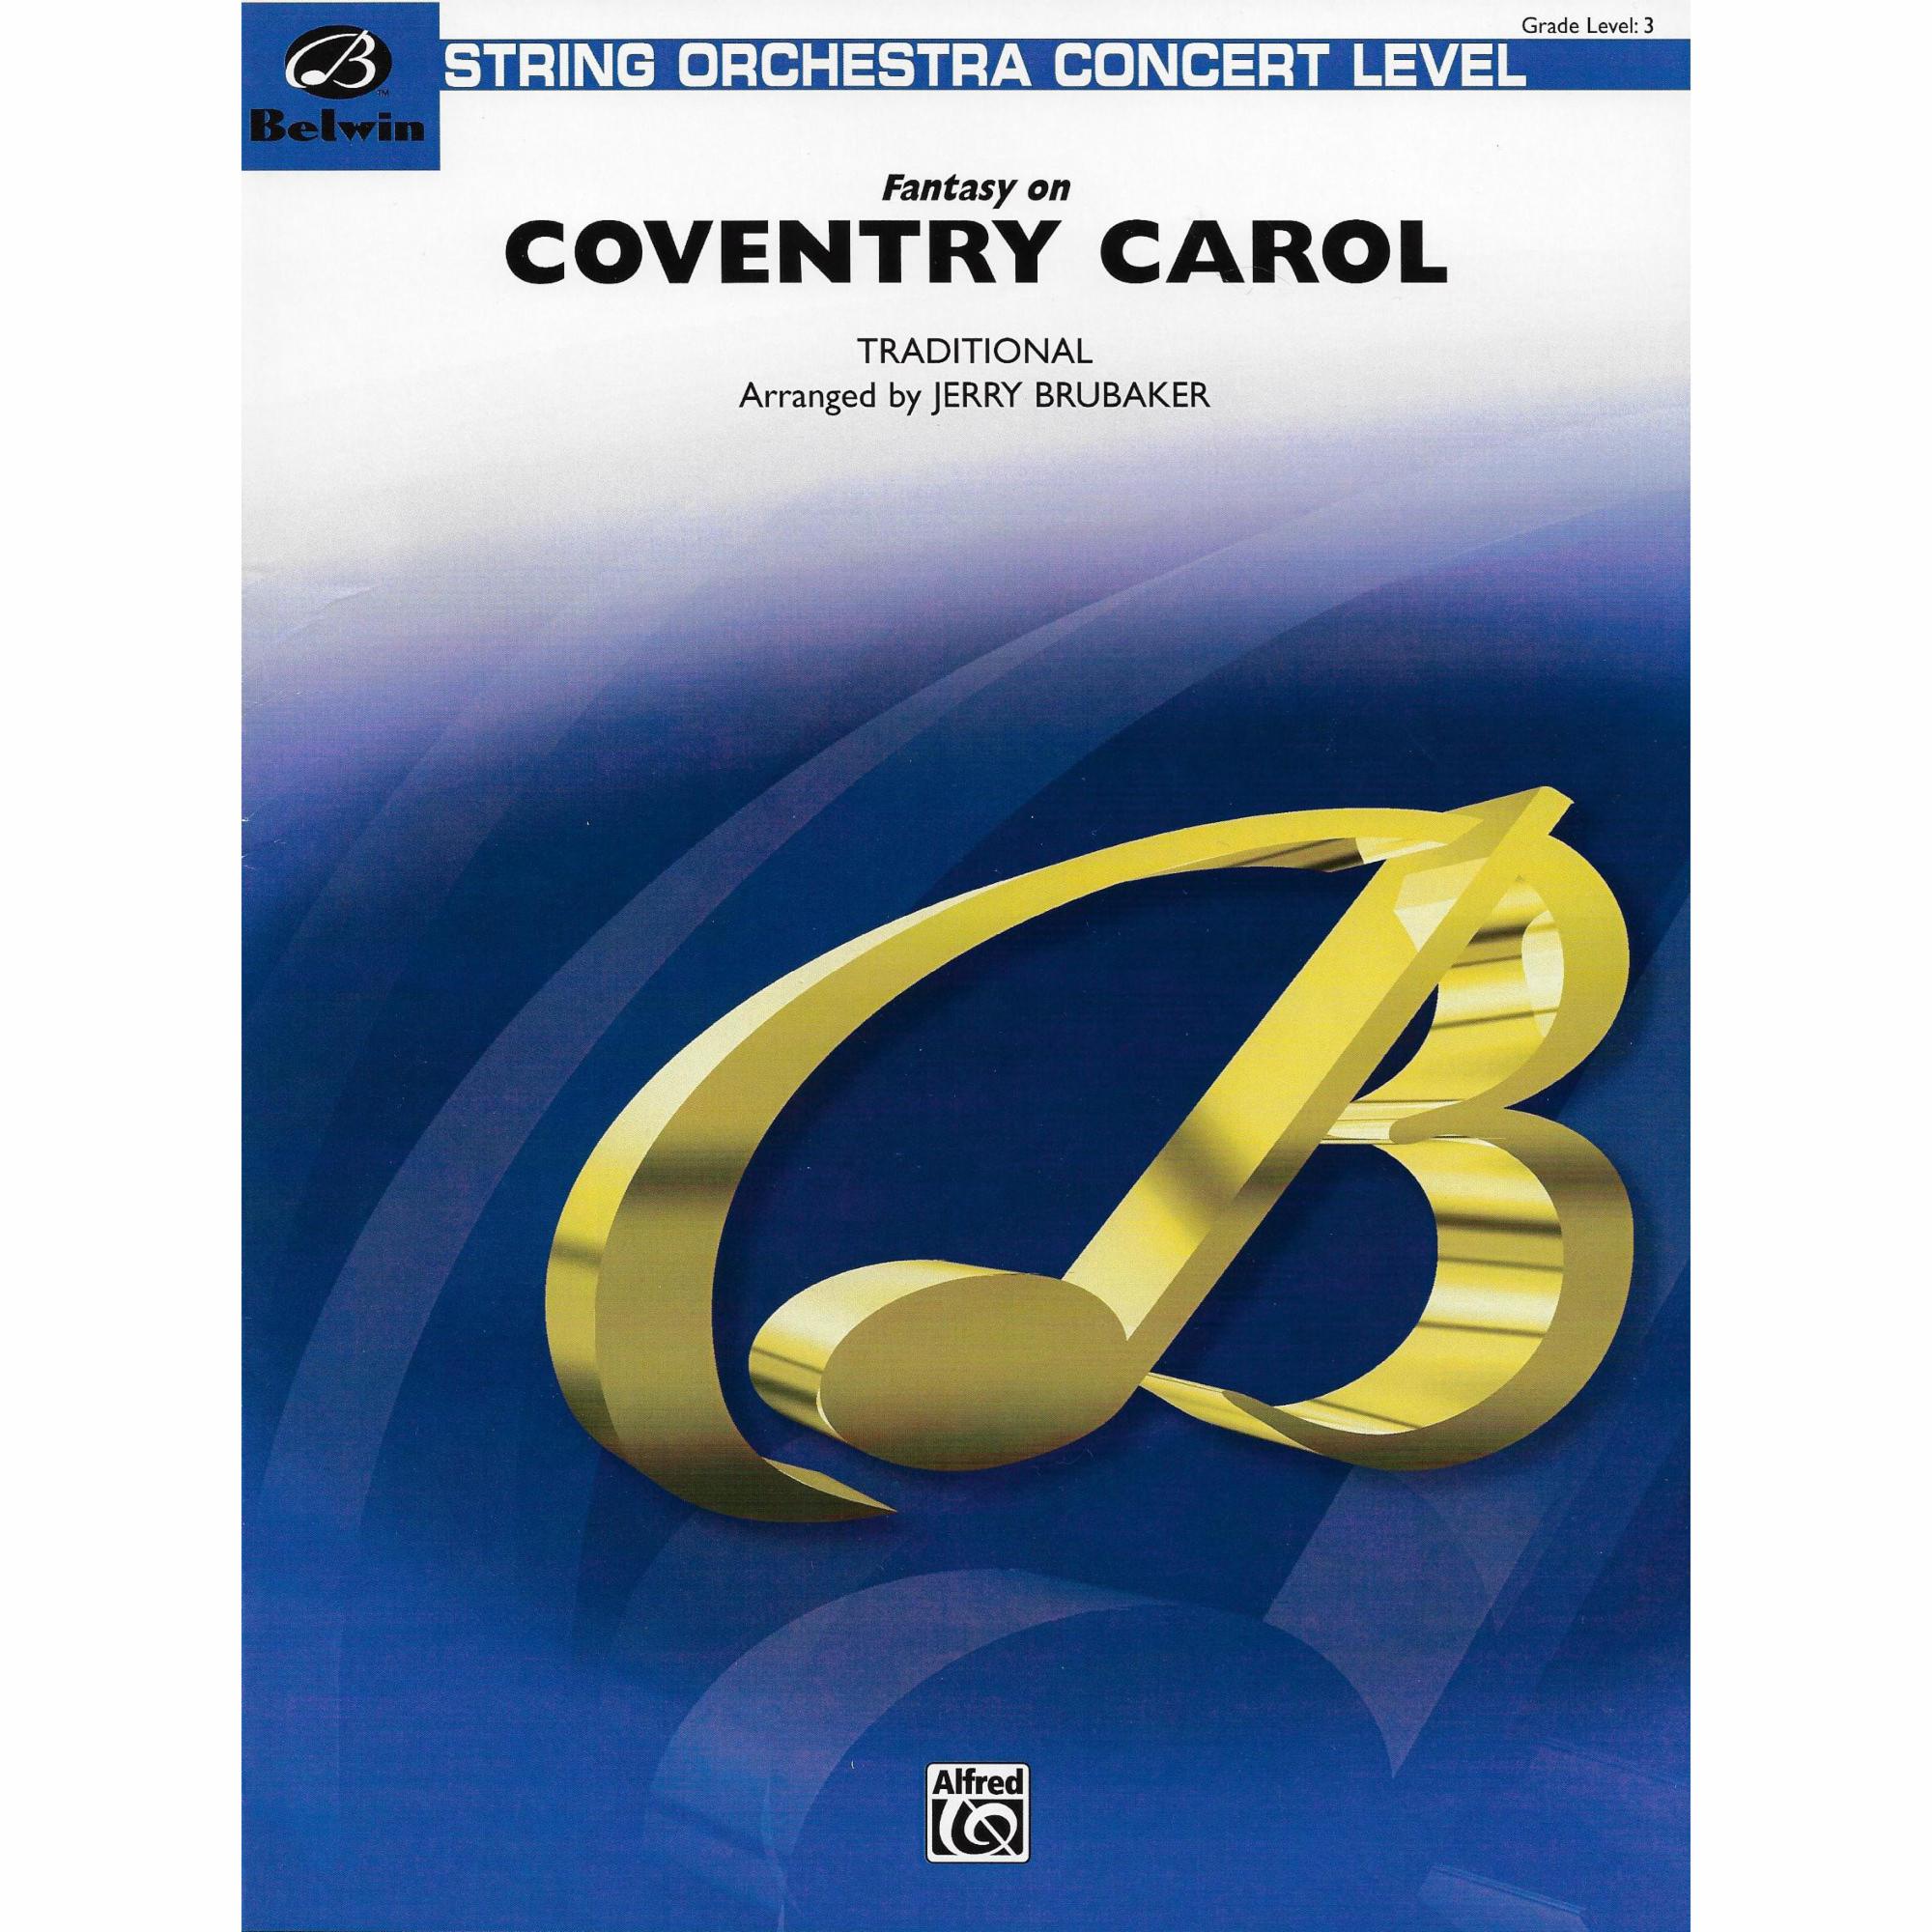 Fantasy on Coventry Carol for String Orchestra